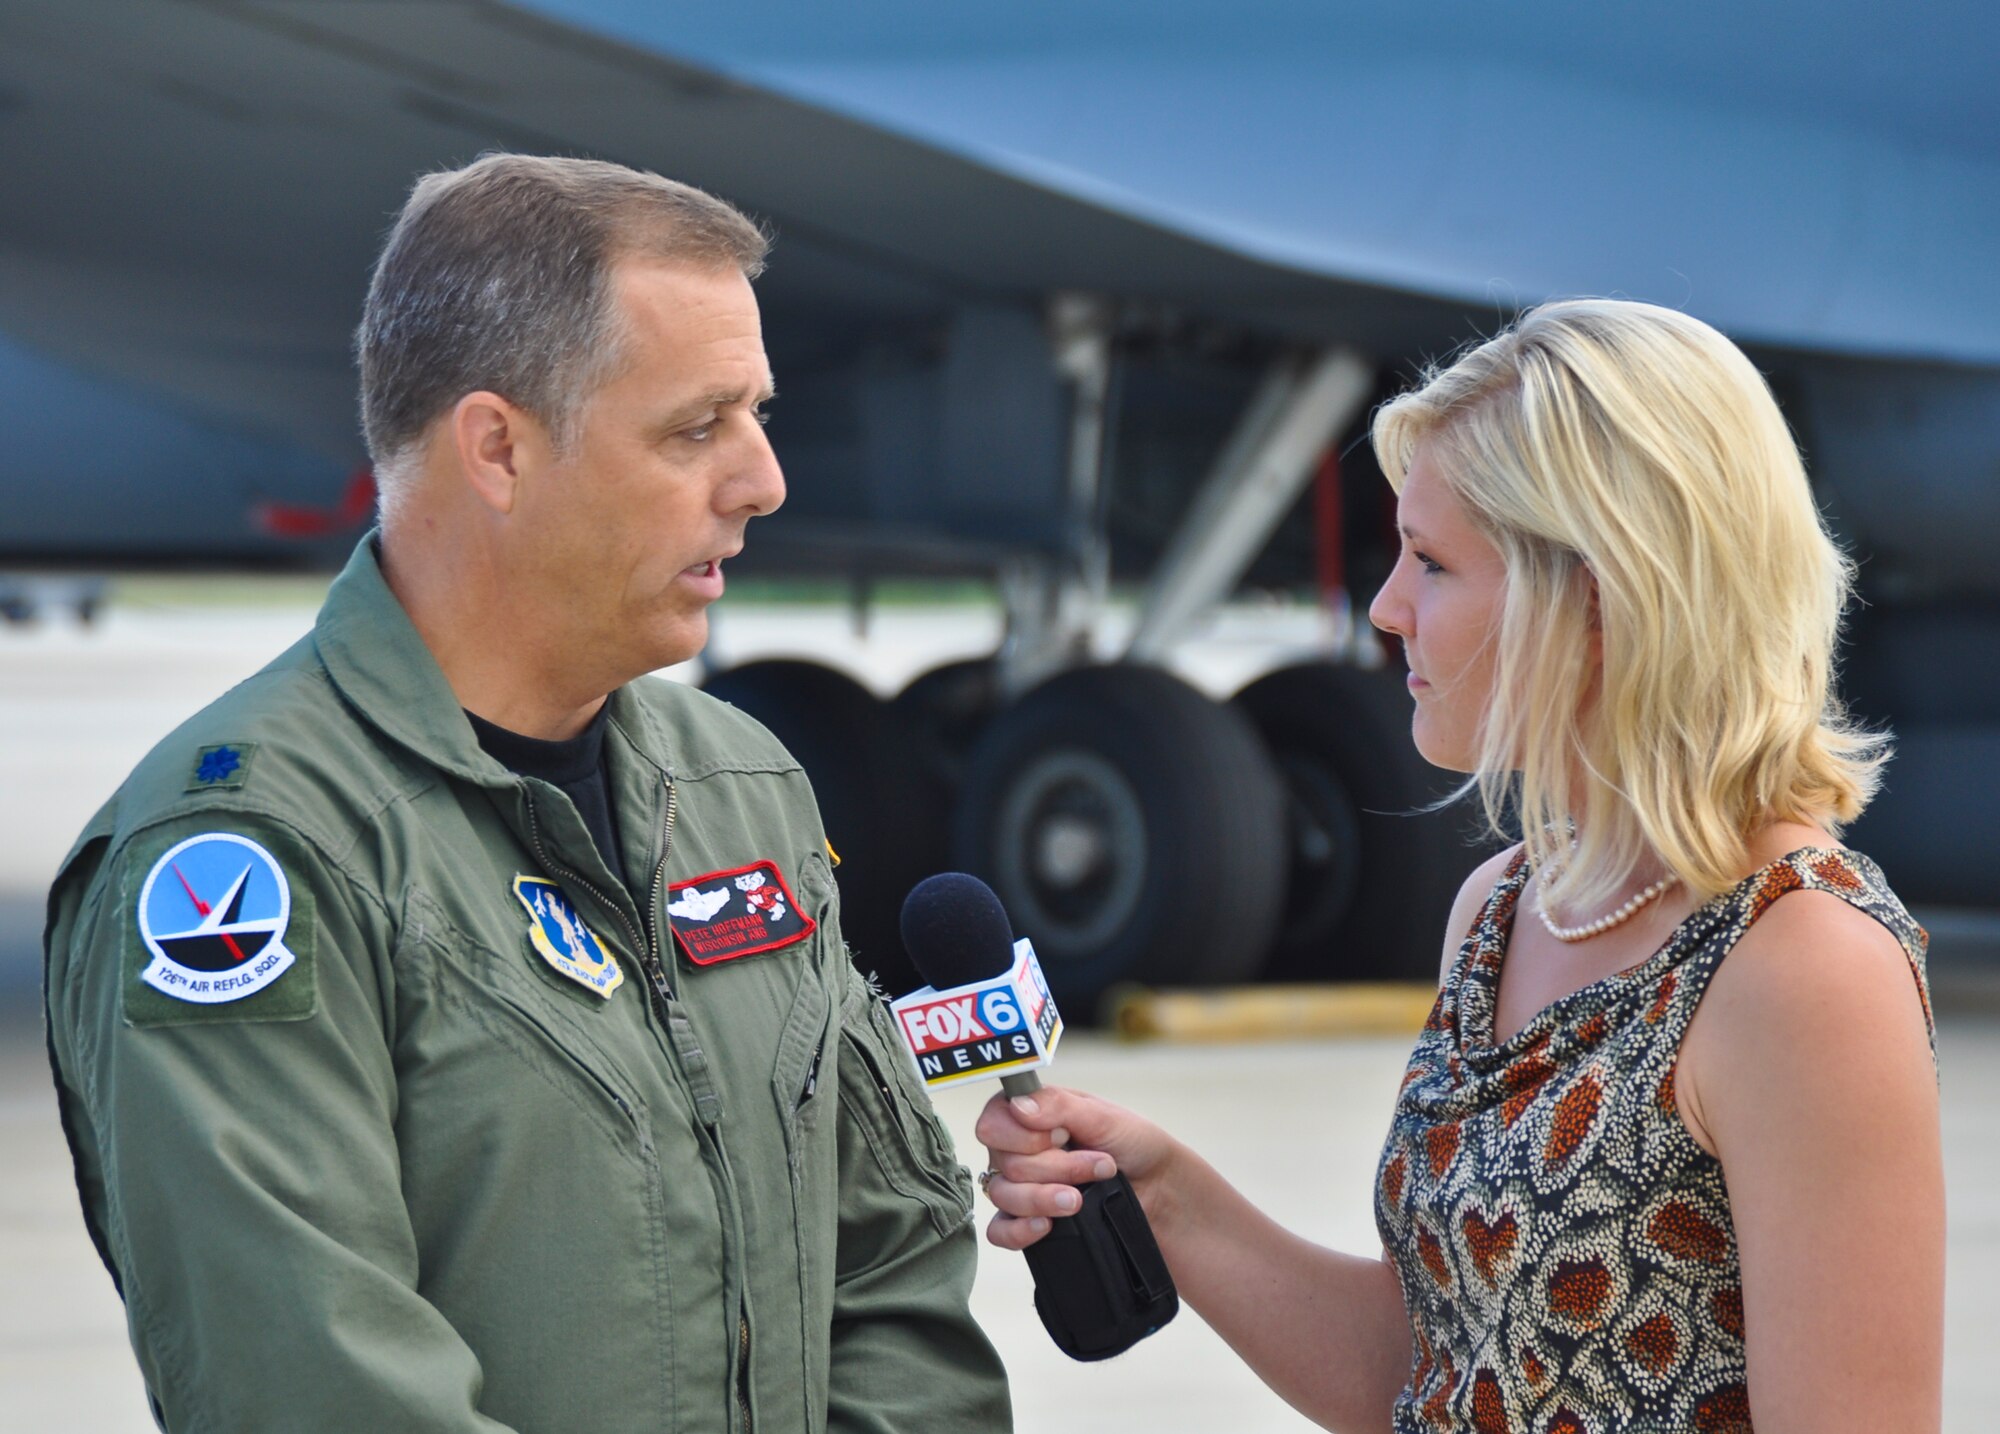 Lt. Col. Pete Hoffman, the 126th Air Refueling Squadron commander, discusses the 128th Air Refueling Wing's role in the Milwaukee Air and Water Show with Laura Langemo, an assignment reporter for Milawukee's Fox 6 News, on Saturday, August 6.  The 128th Air Refueling Wing hosted the Air Force Thunderbirds air demonstration team throughout the air show and provided support for the Las Vegas-based team.  The Thunderbirds' F-16C Falcons are home stationed at Nellis Air Force Base, Nevada, and they perform 70 shows per year with venues overseas and in the United States.  (U.S. Air Force photo by Staff Sgt. Jeremy Wilson / Released)